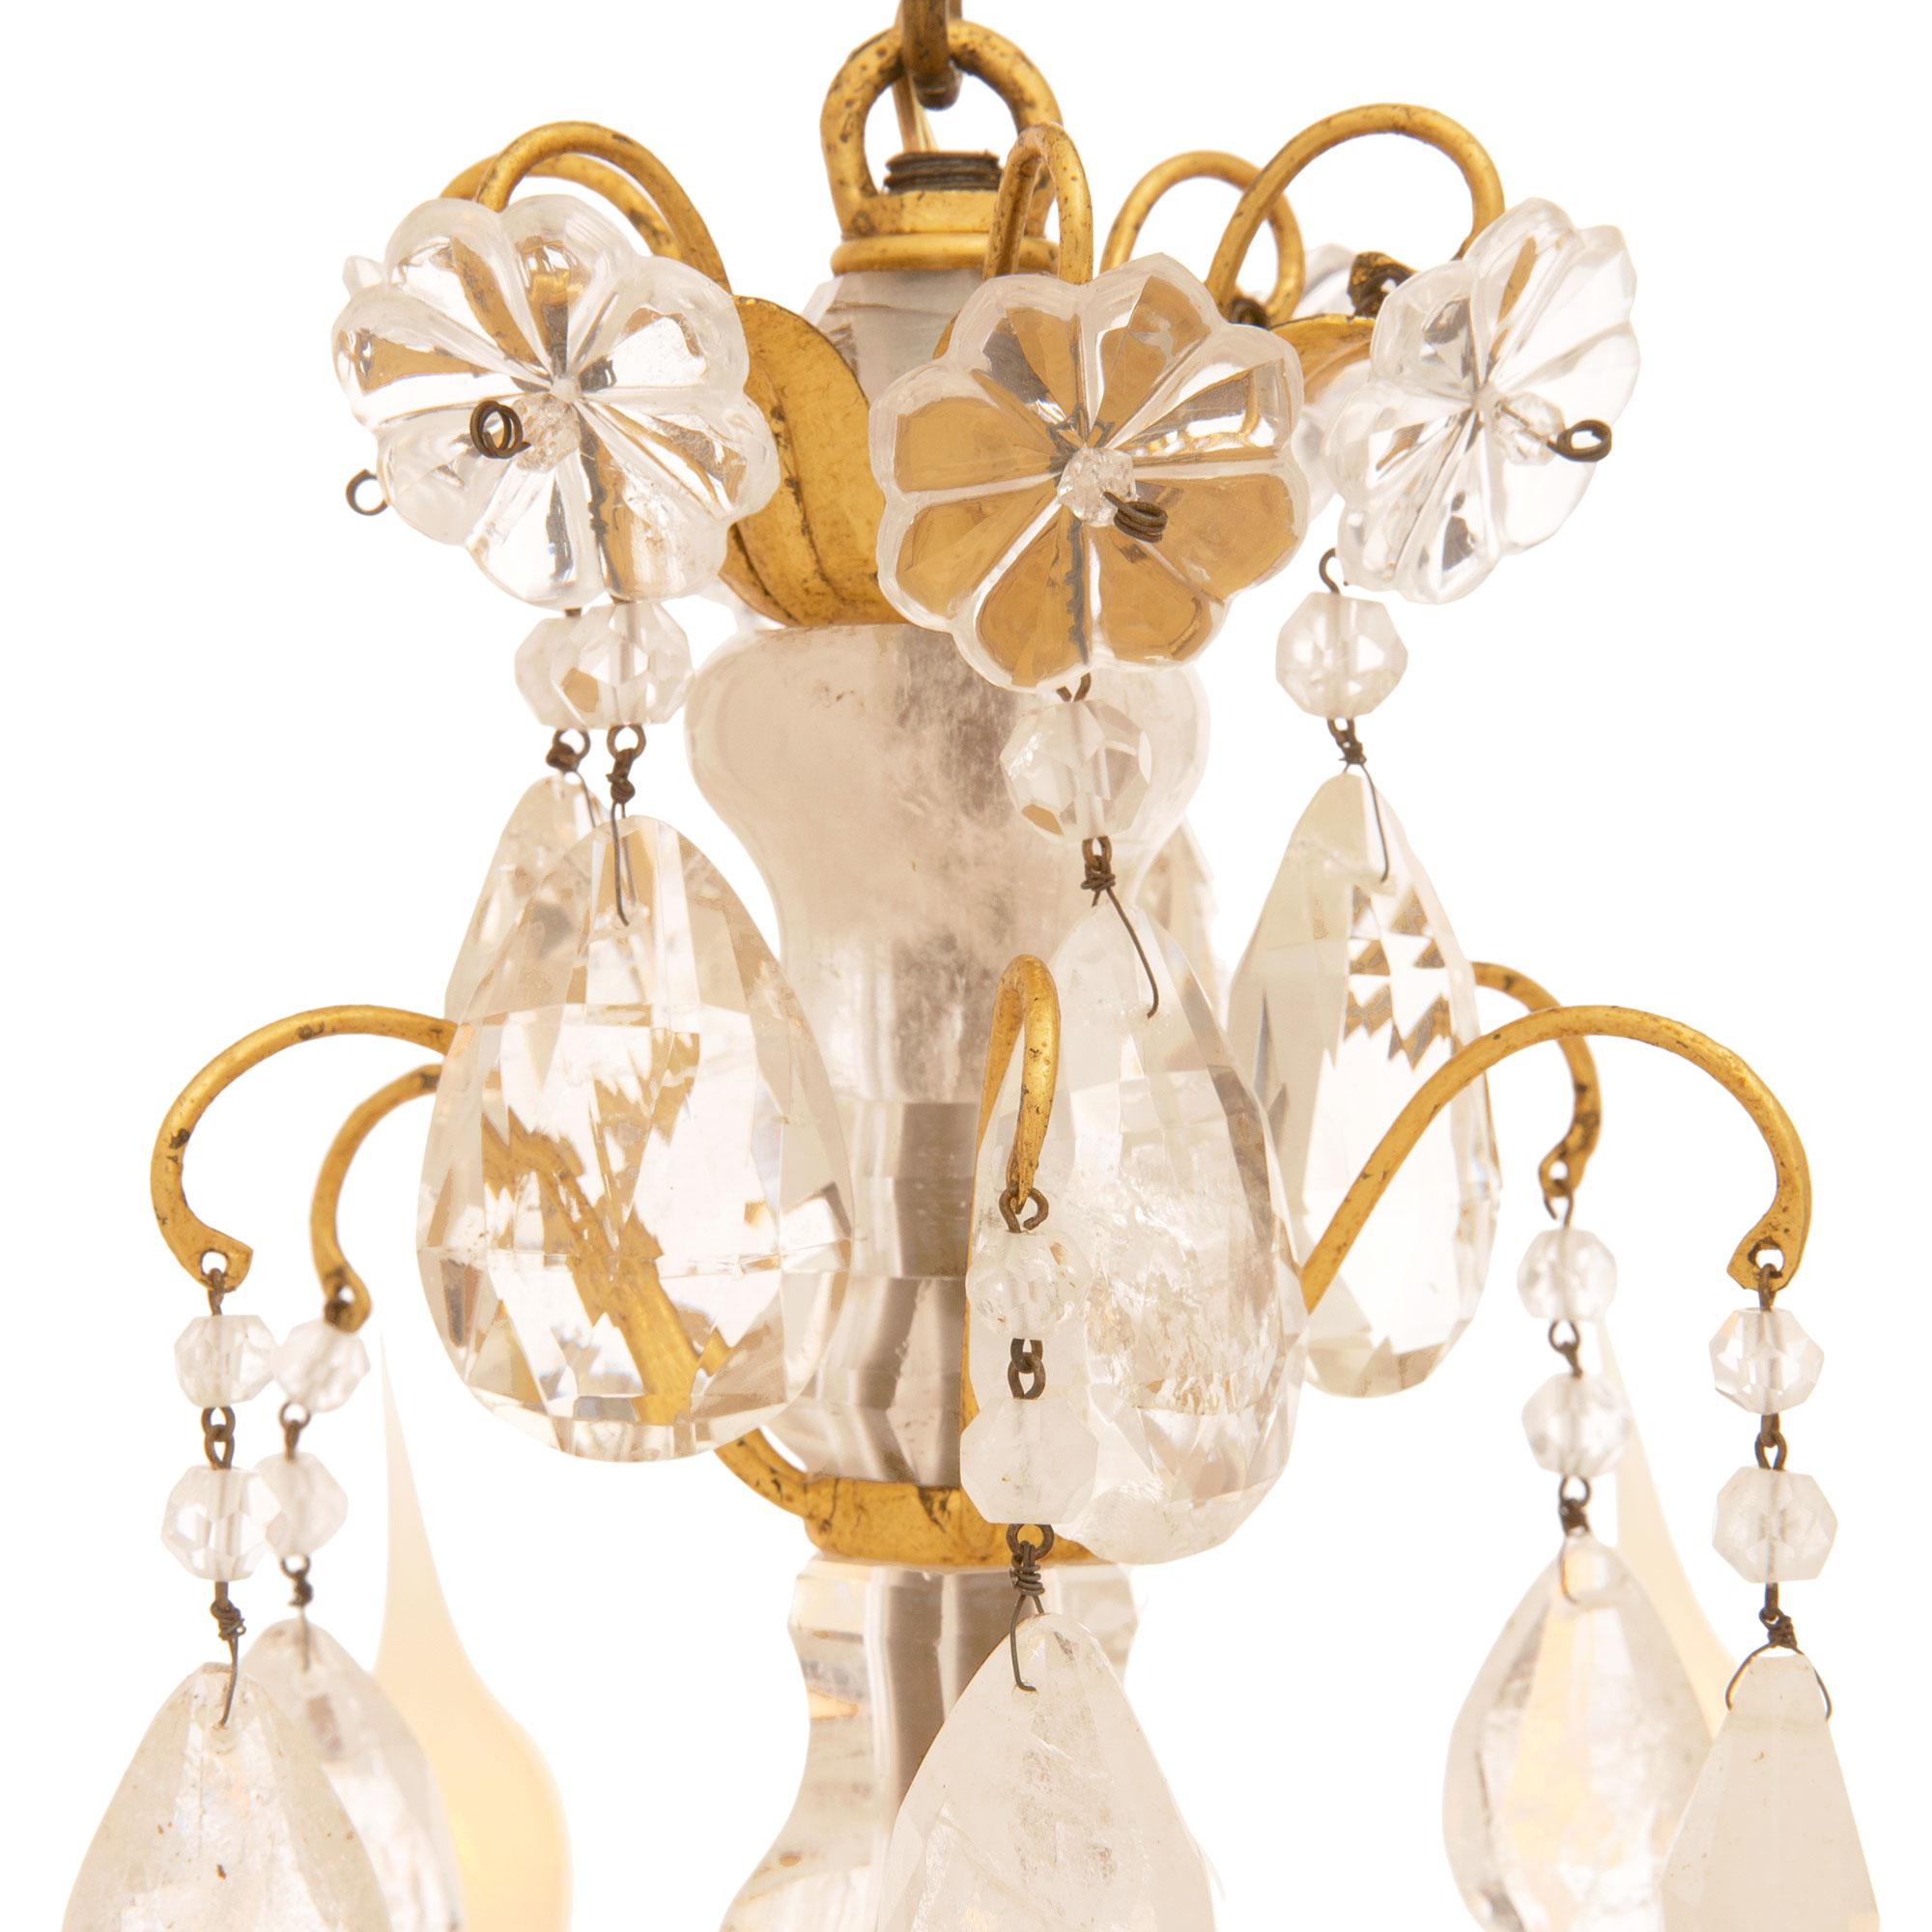 Italian Early 19th Century Louis XVI St. Gilt Metal And Rock Crystal Chandelier For Sale 1